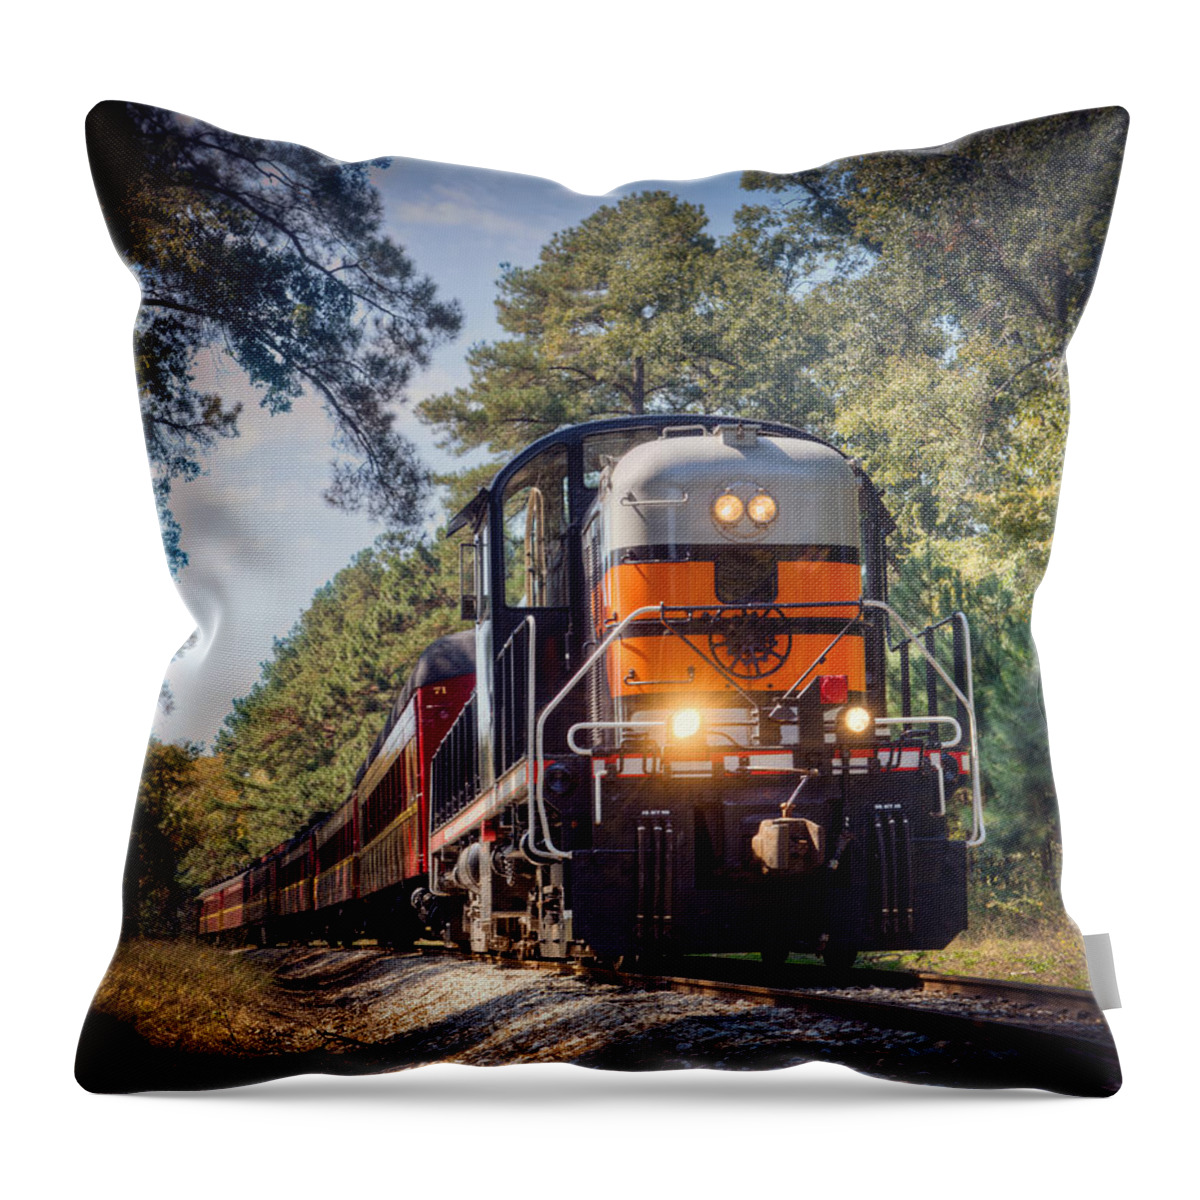 Texas Throw Pillow featuring the photograph Texas State Railroad by Ray Devlin